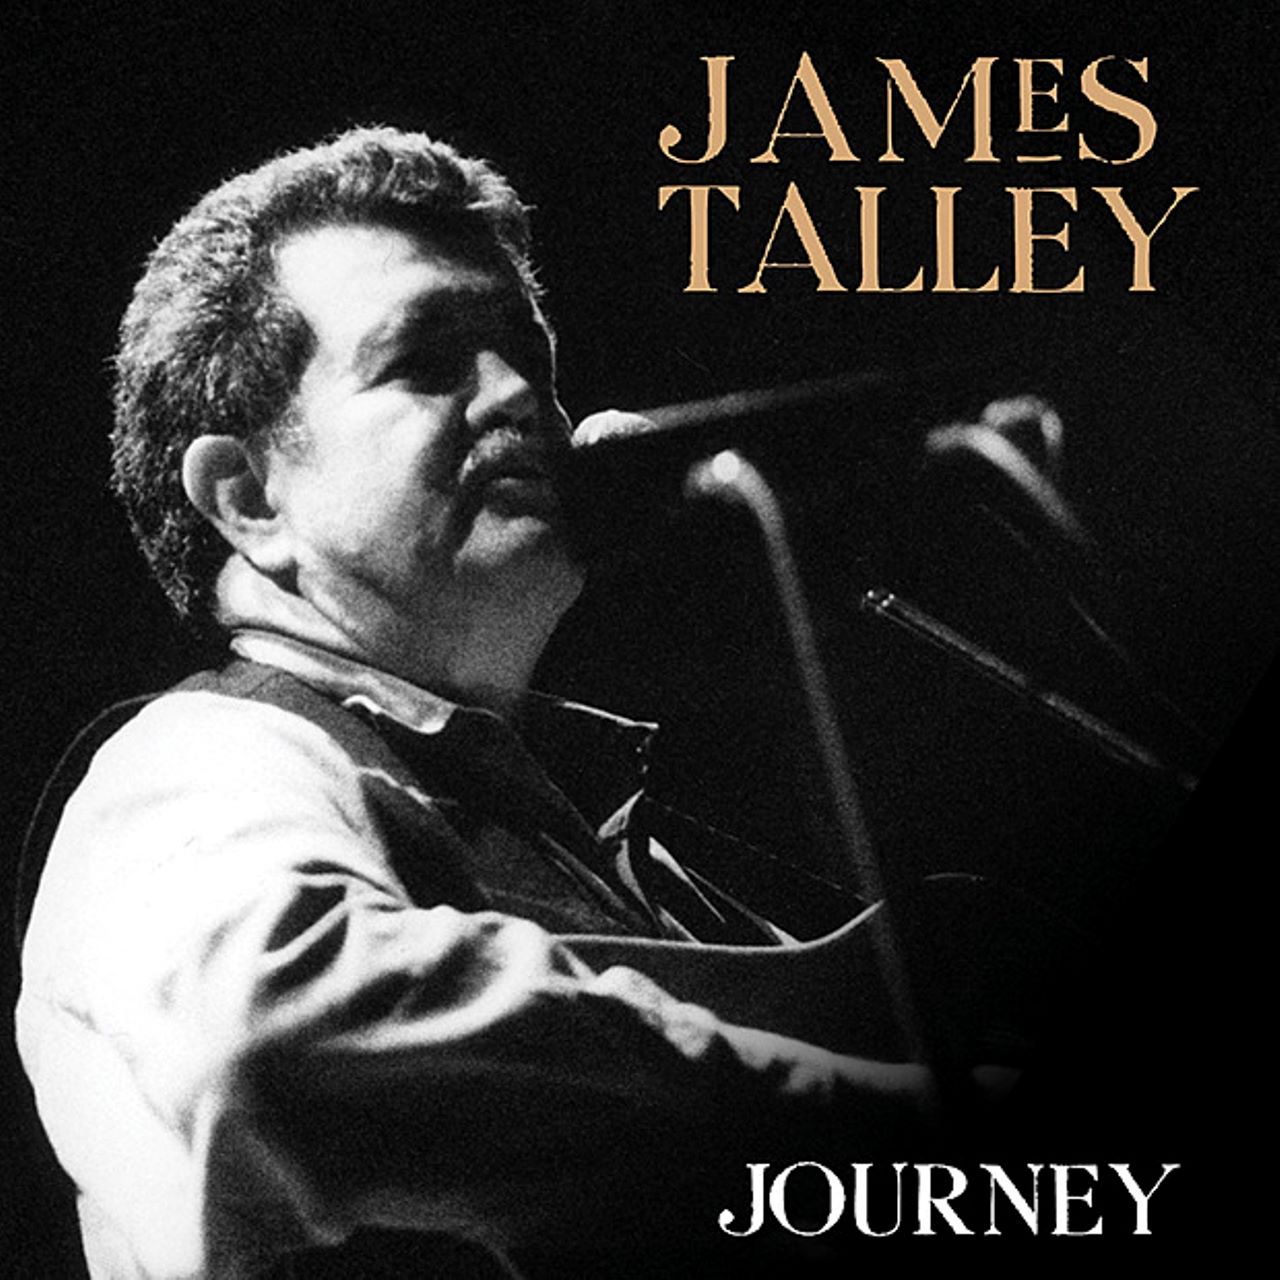 James Talley - Journey cover album